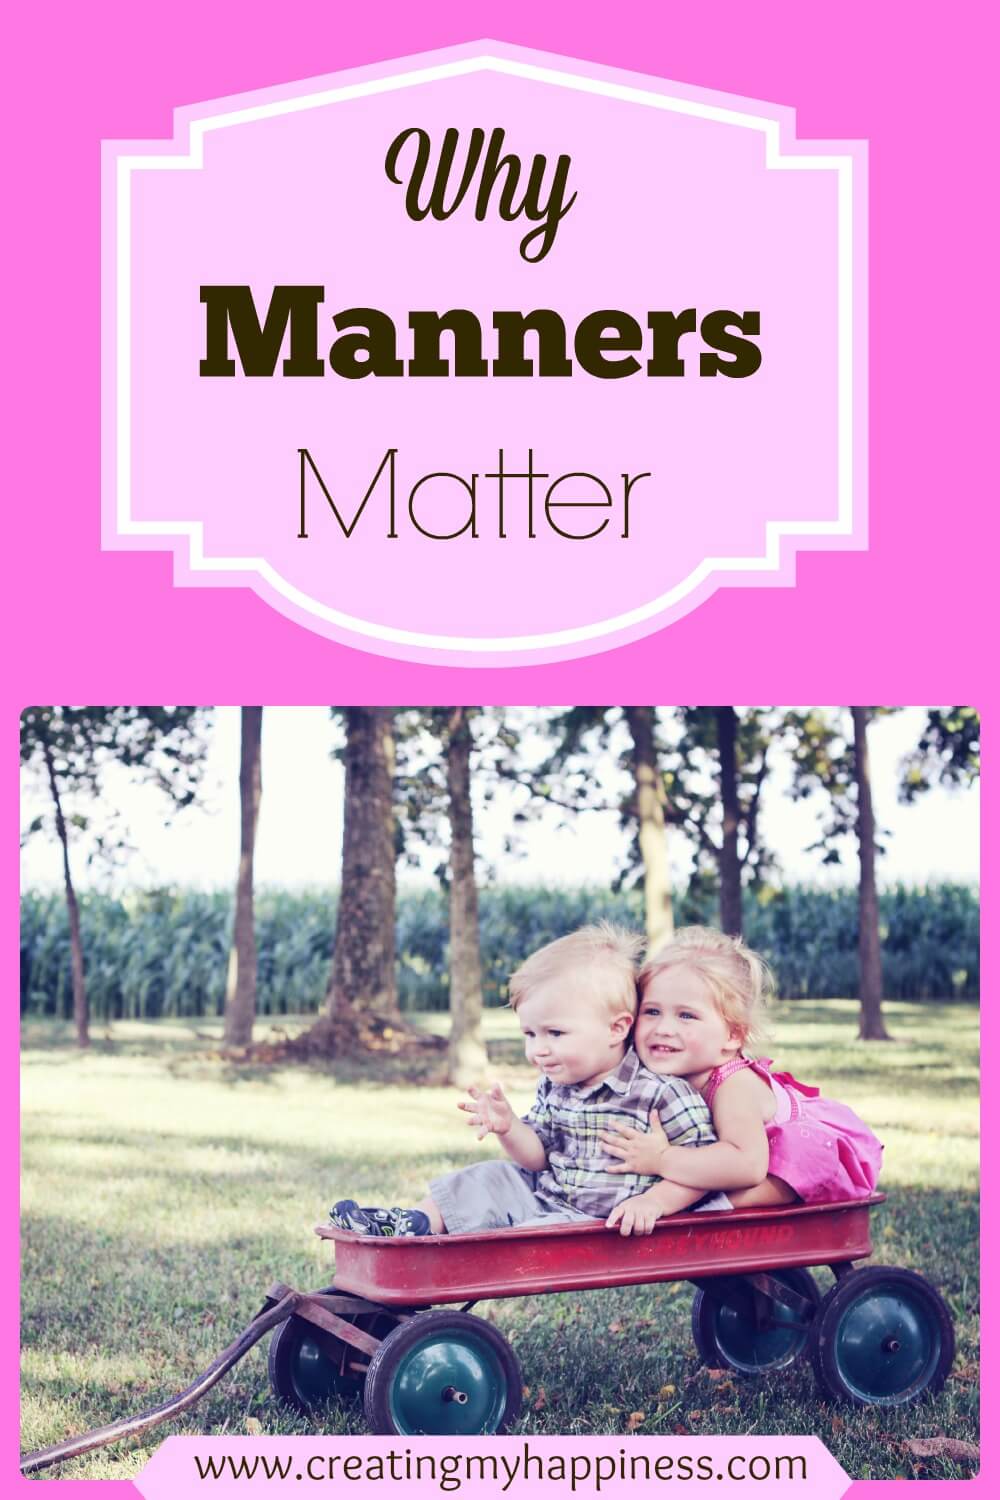 Teaching and constantly reminding kids to use good manners can be tedious, but it's well worth it. Here's why manners matter.